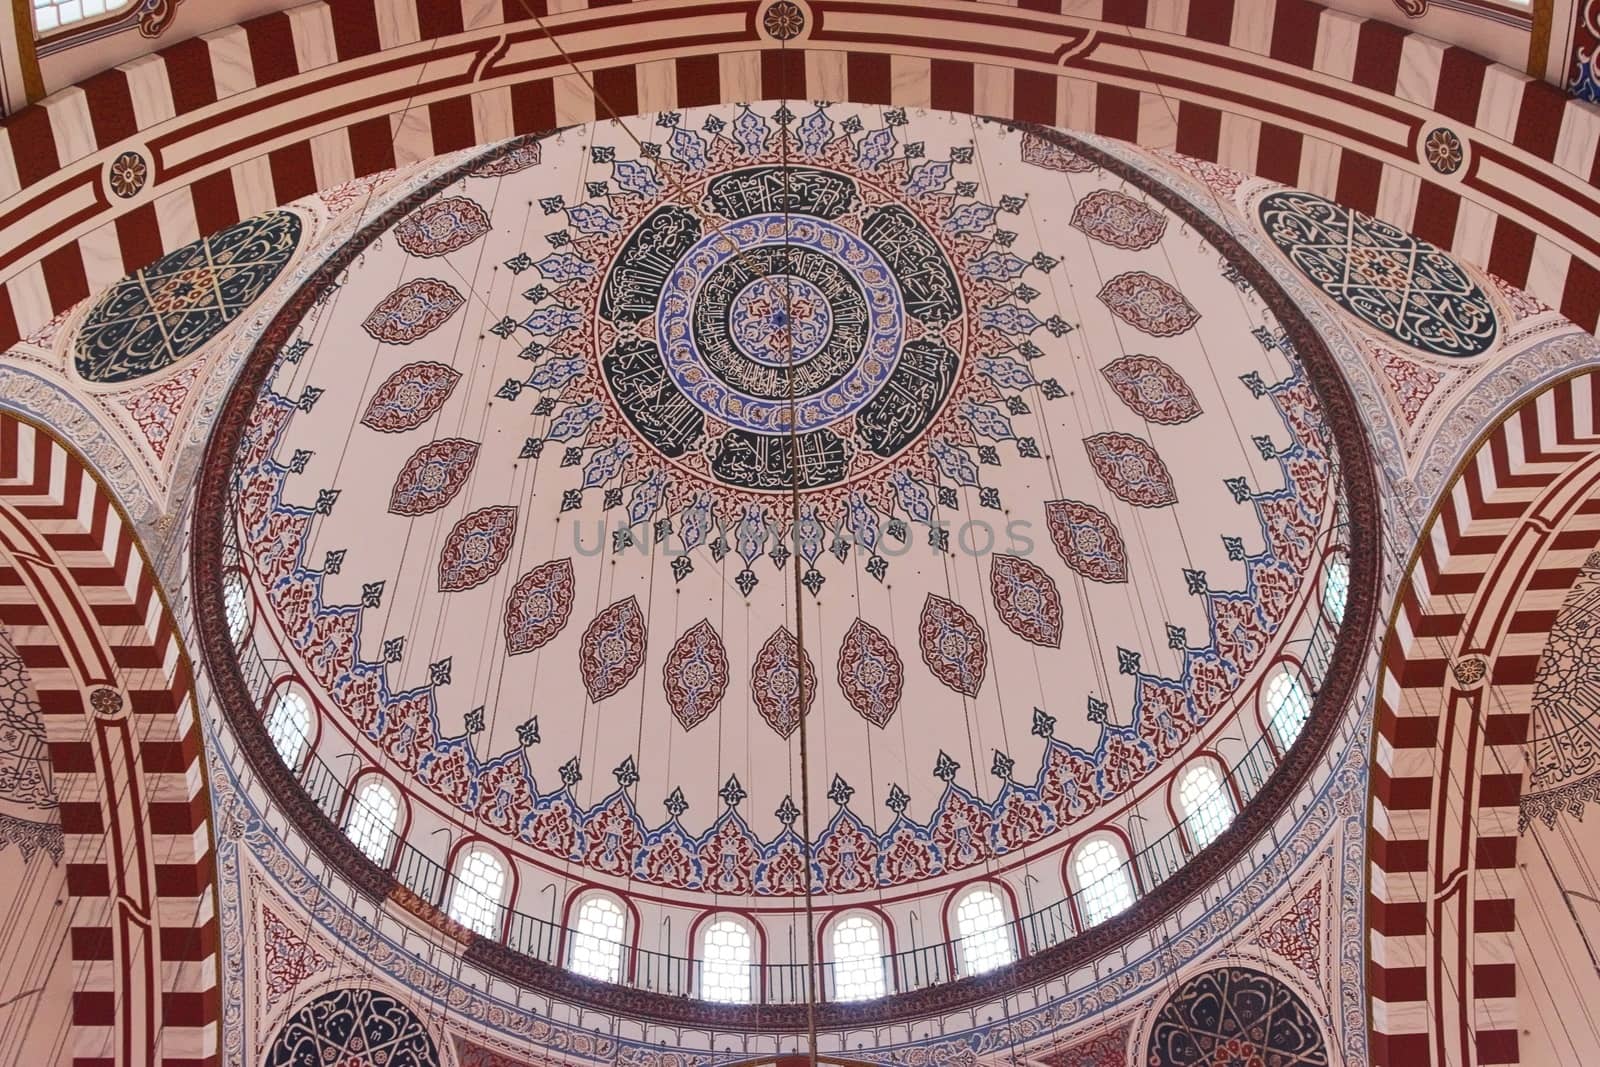 Sehzade Mosque, an Ottoman imperial mosque in Istanbul, Turkey. Interior view of the main dome. Architectural detail. by hernan_hyper